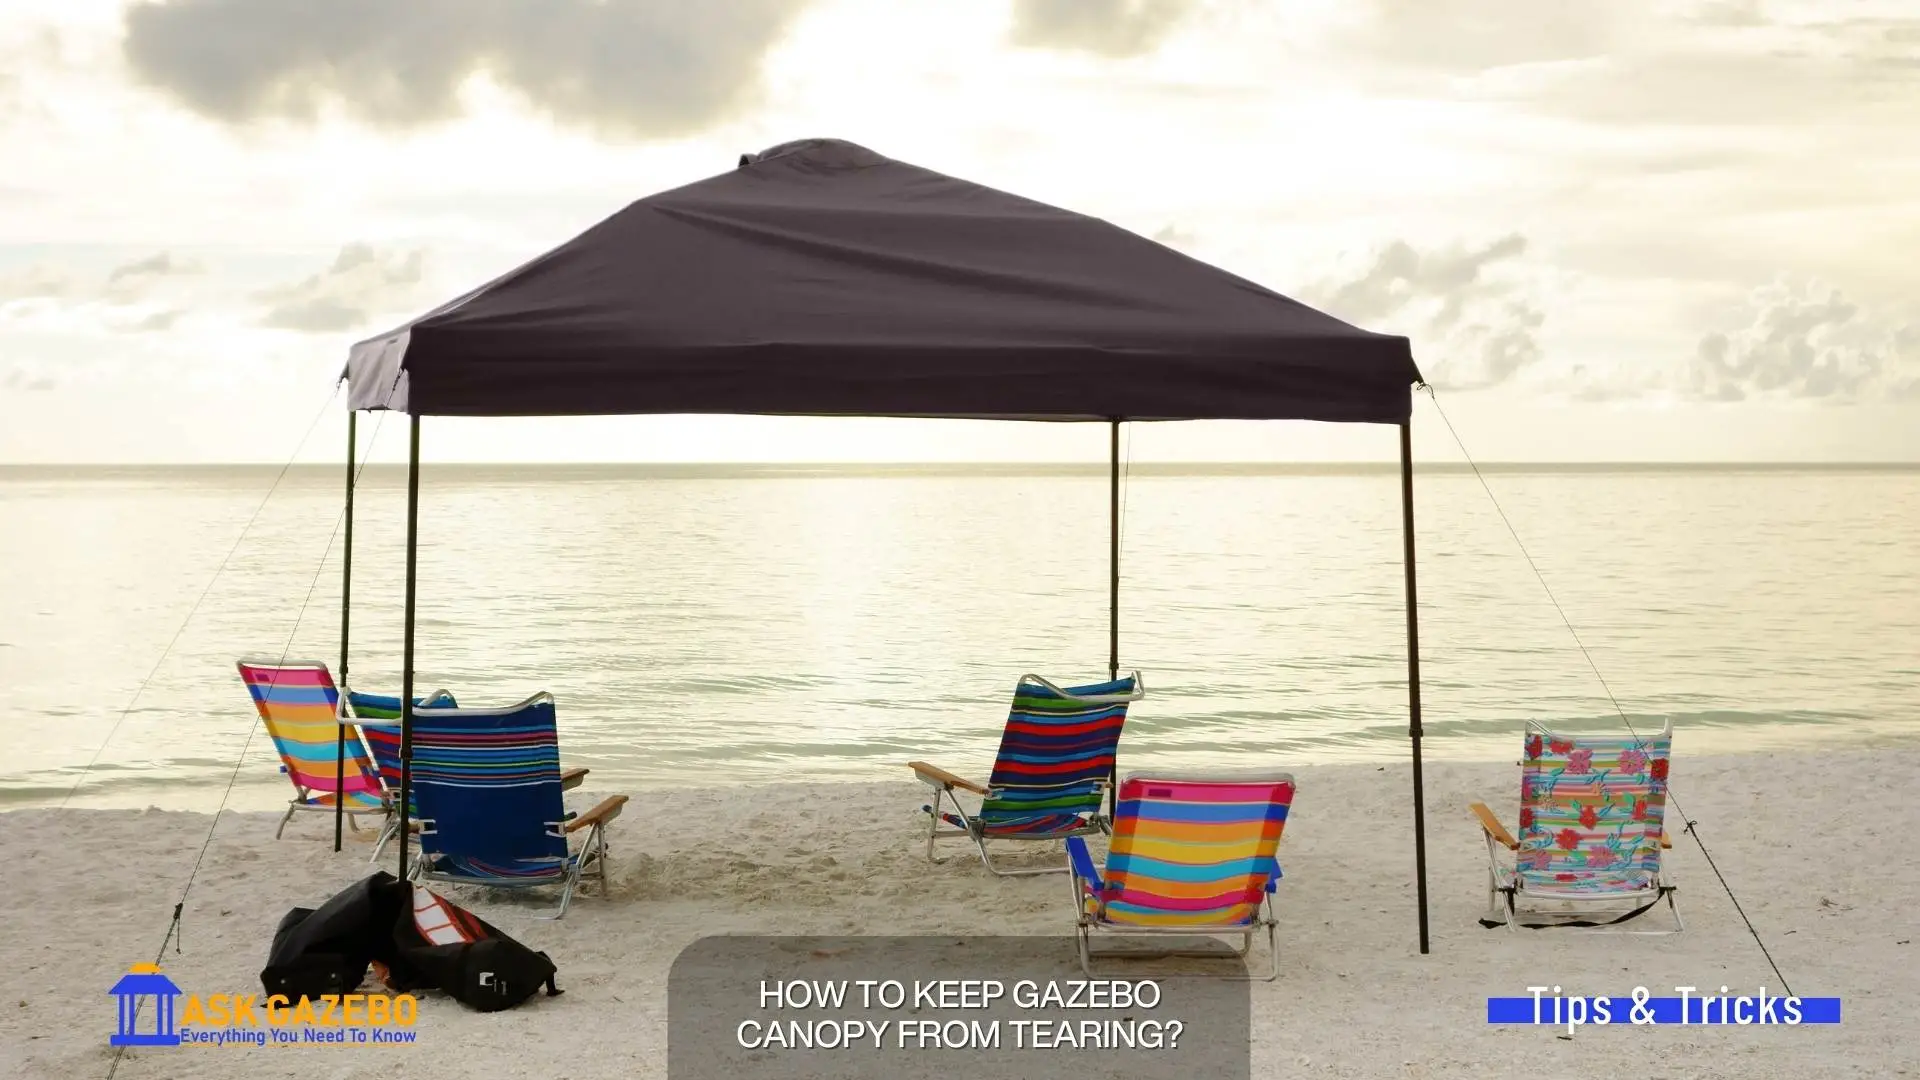 How To Keep Gazebo Canopy From Tearing